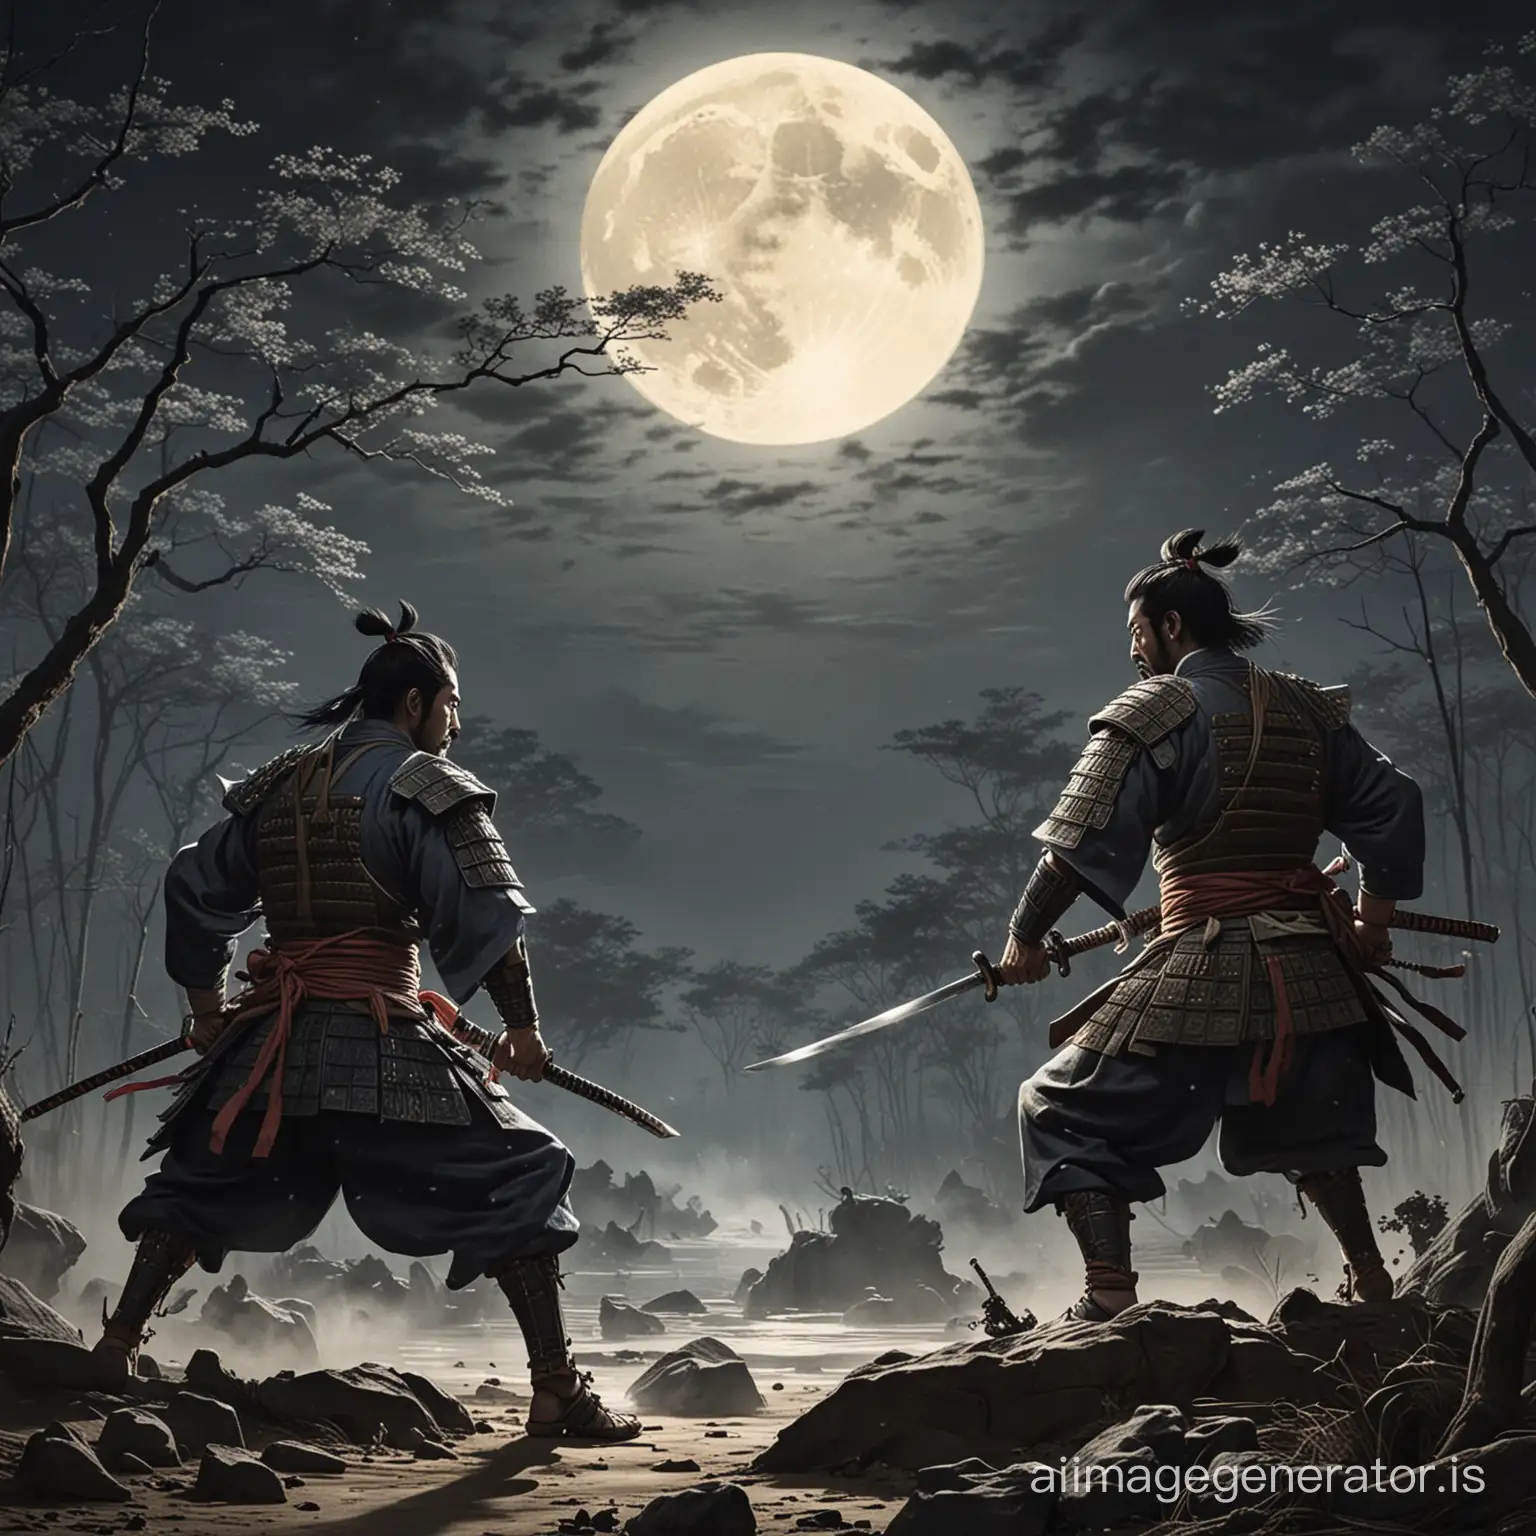 2 samurai fought fiercely under the moonlight, one person was injured